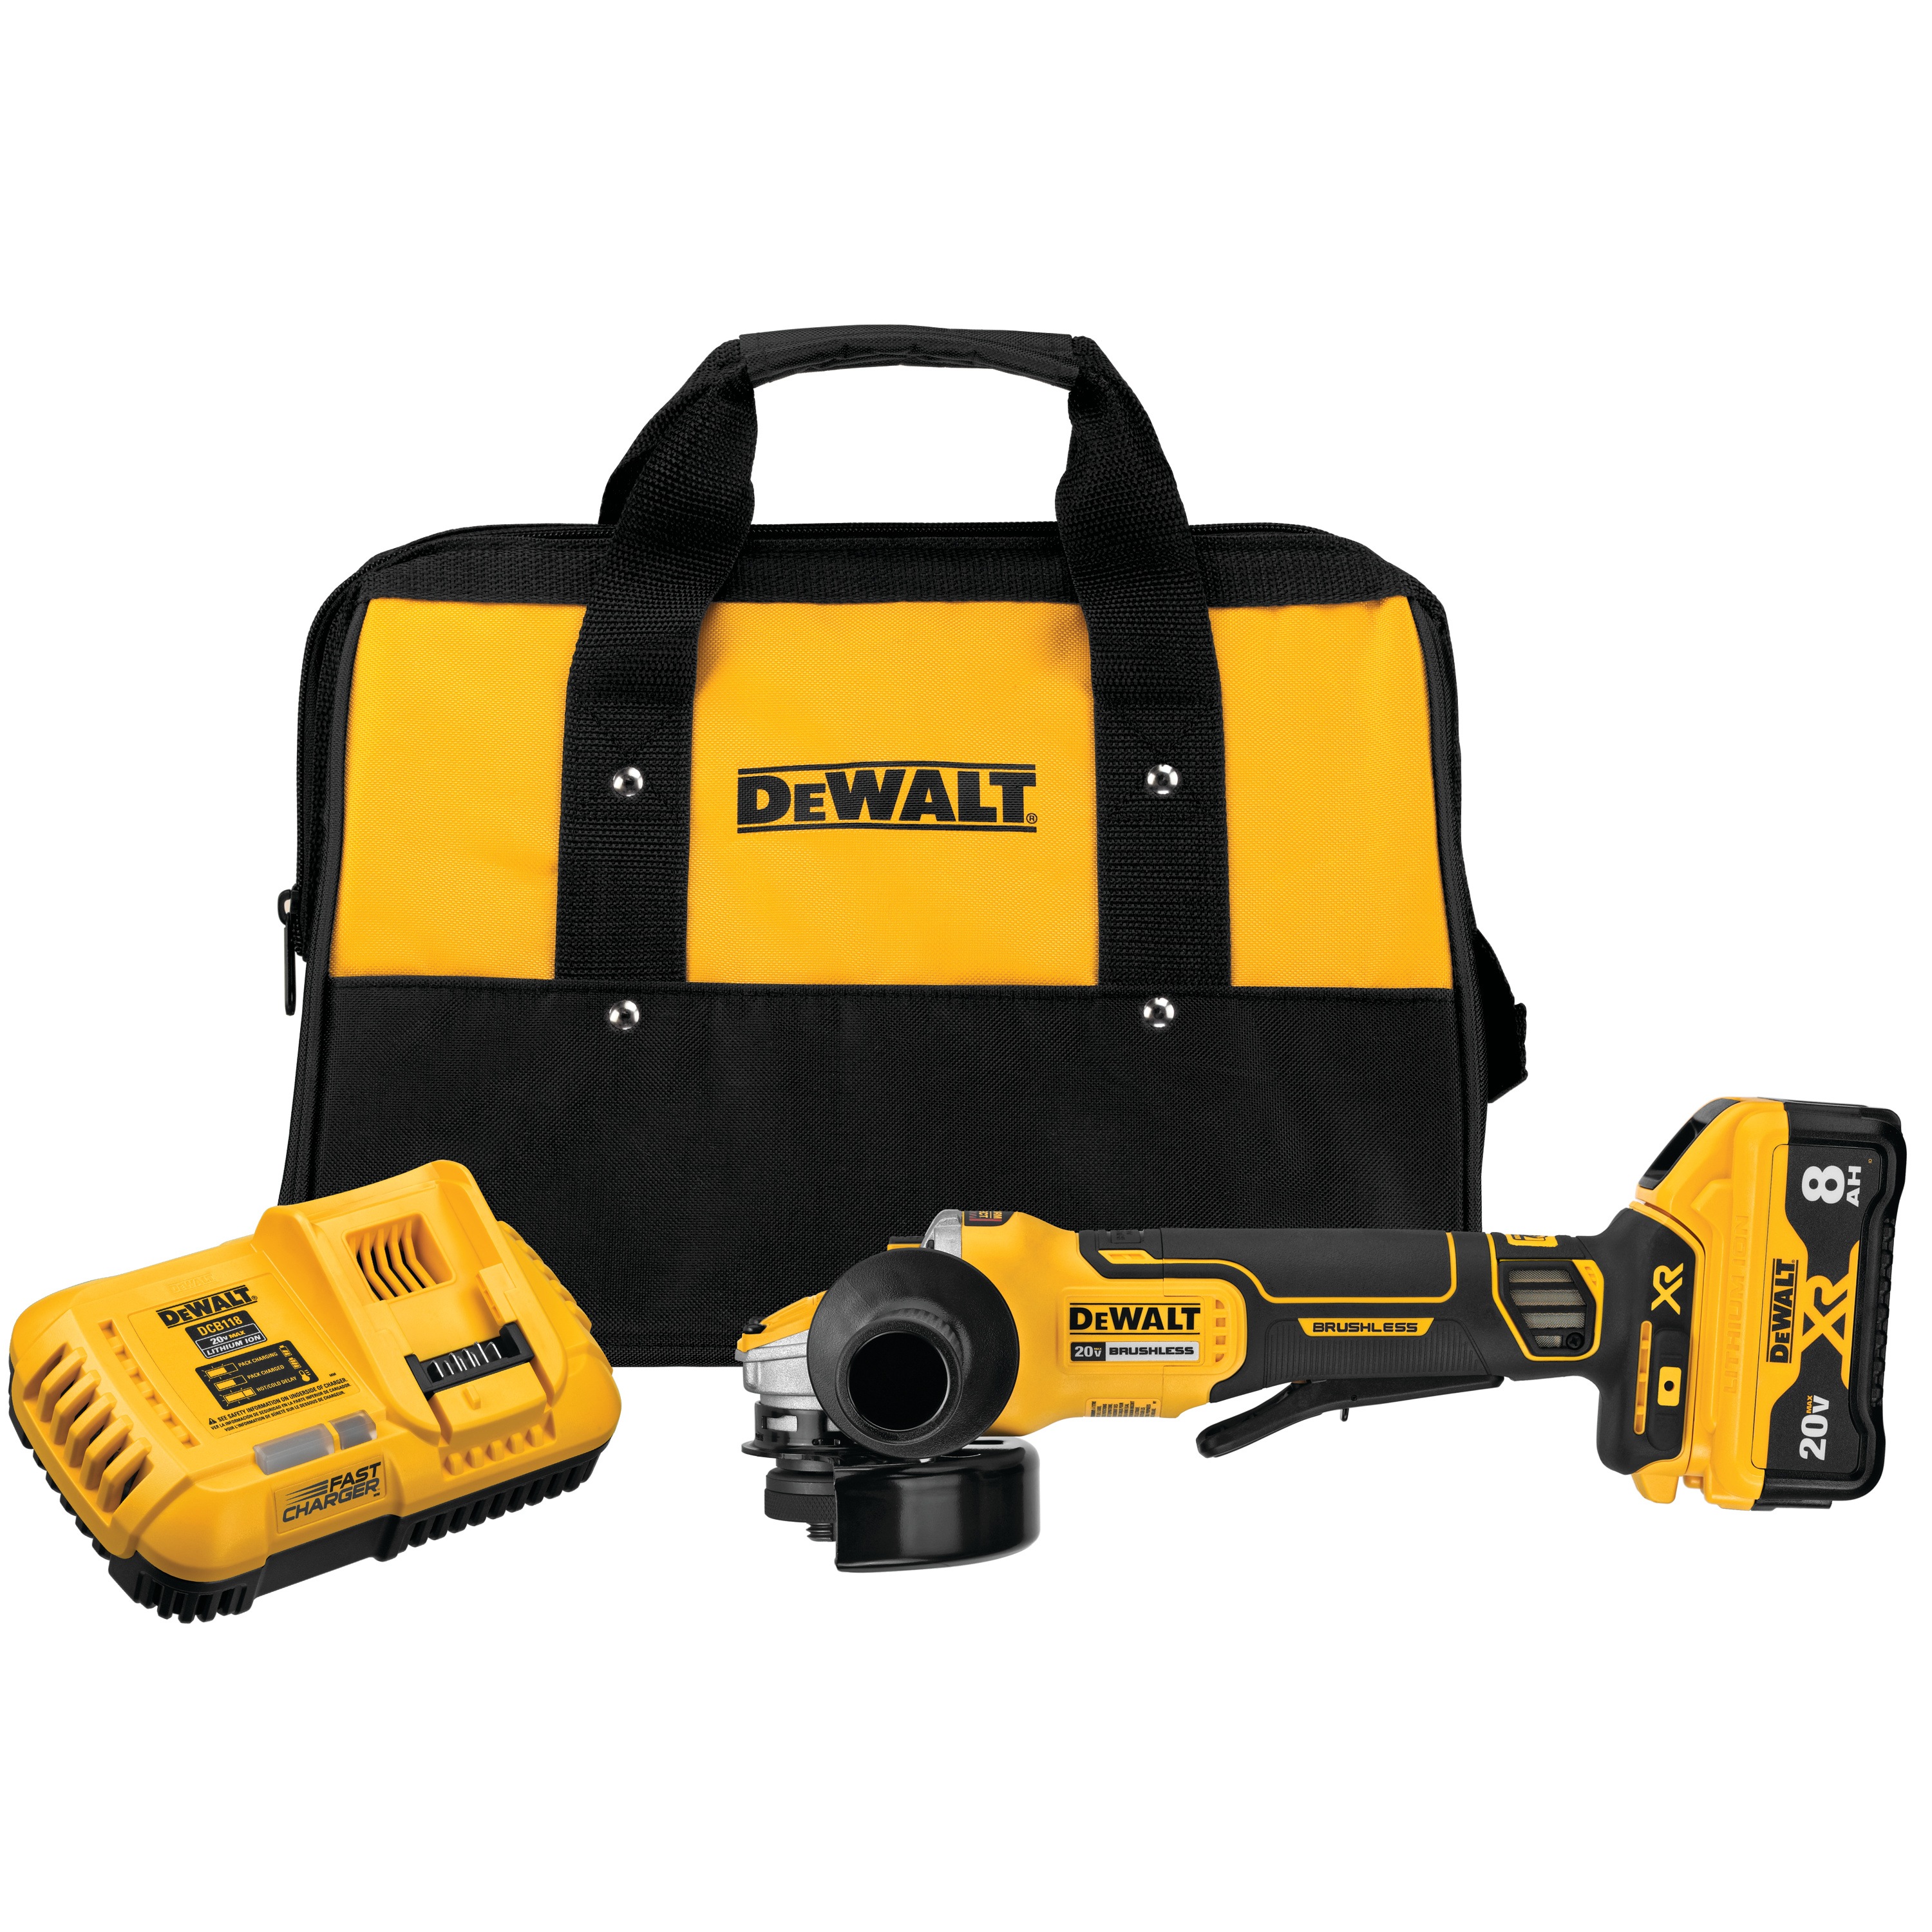 SMALL ANGLE GRINDER WITH POWER DETECT TOOL KIT